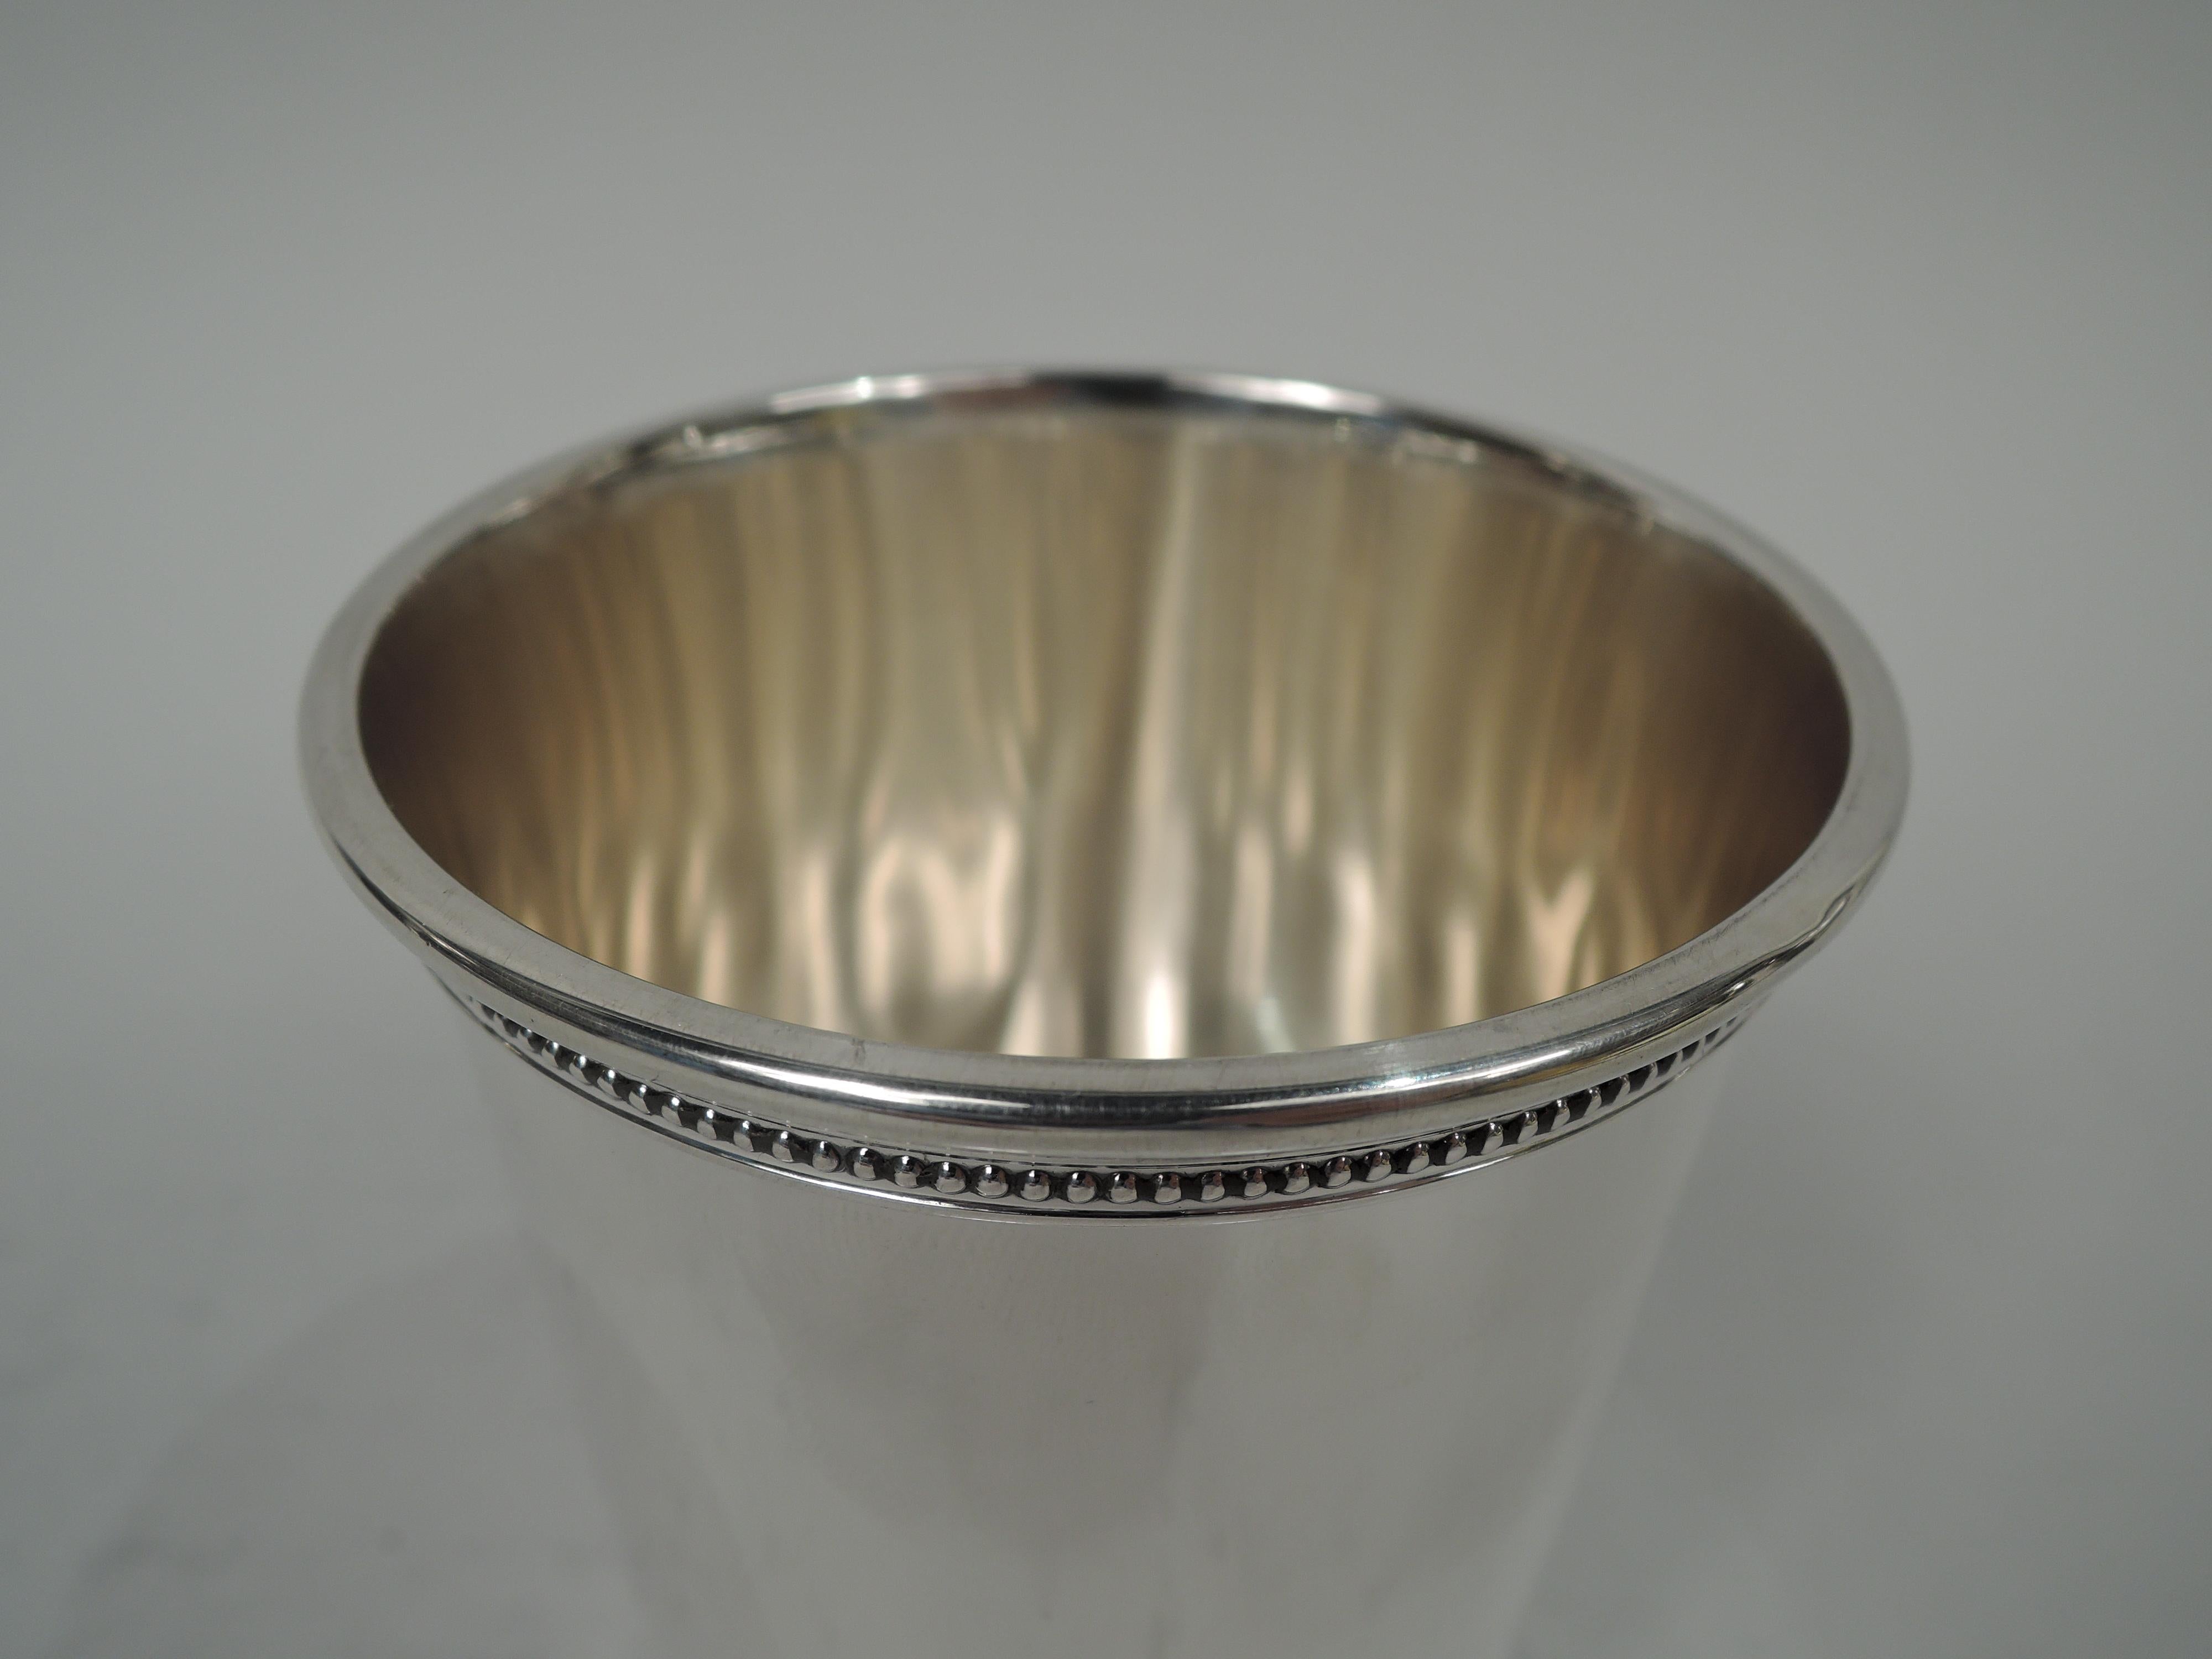 Reagan-era sterling silver mint julep cup. Made by Scearce in Shelbyville, Kentucky. Straight and tapering sides, and beaded and molded rim and foot. Ronald Reagan was president from 1981 to 1989. Marks include maker’s stamp and presidential date